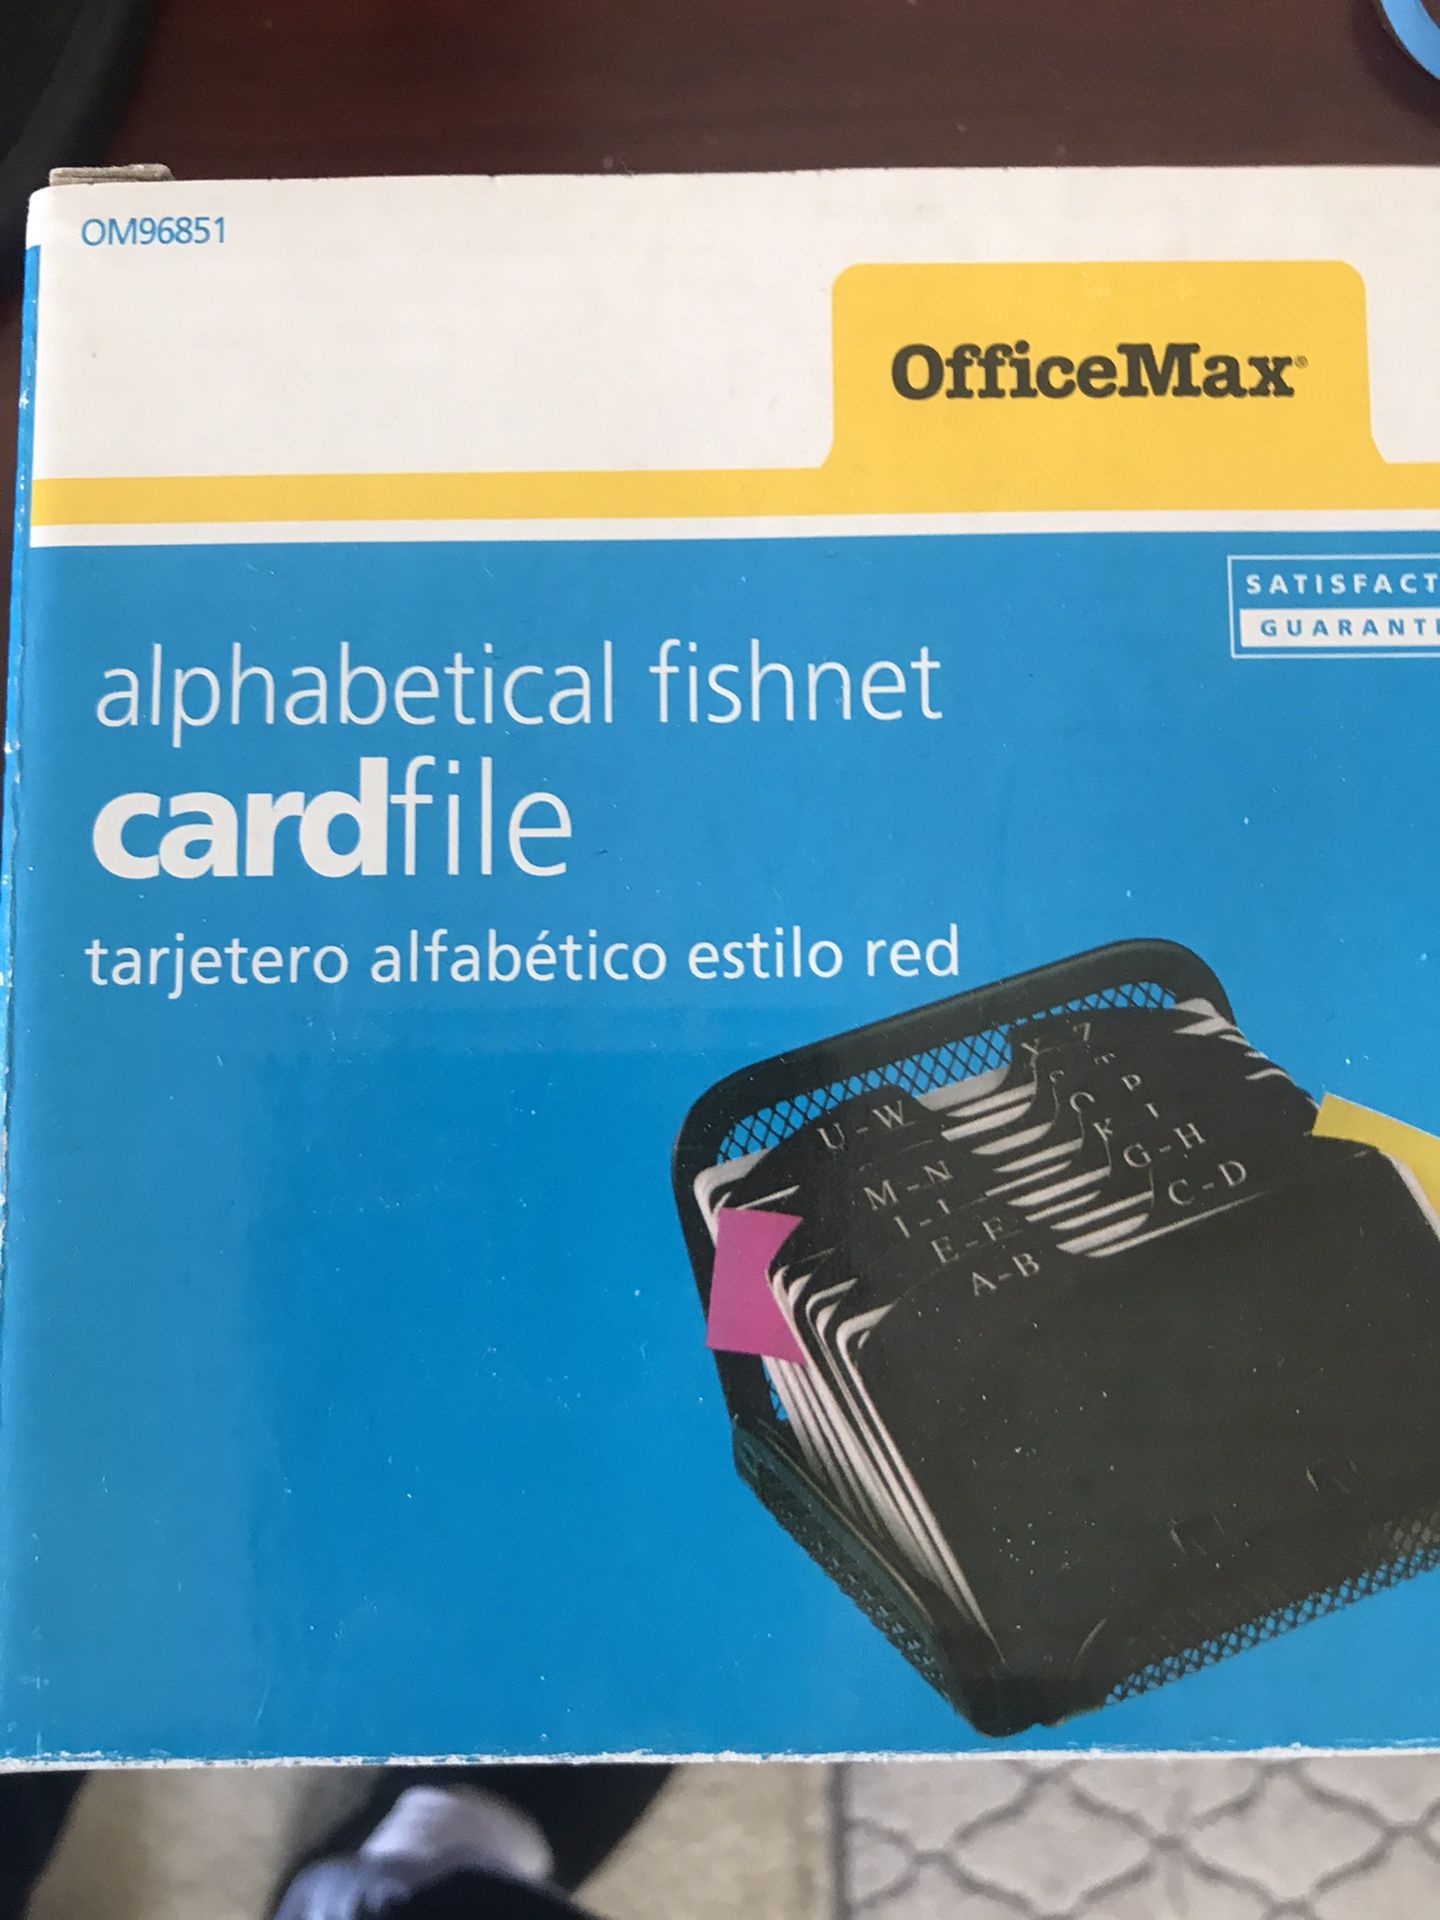 OfficeMax alphabetical fishnet cardfile